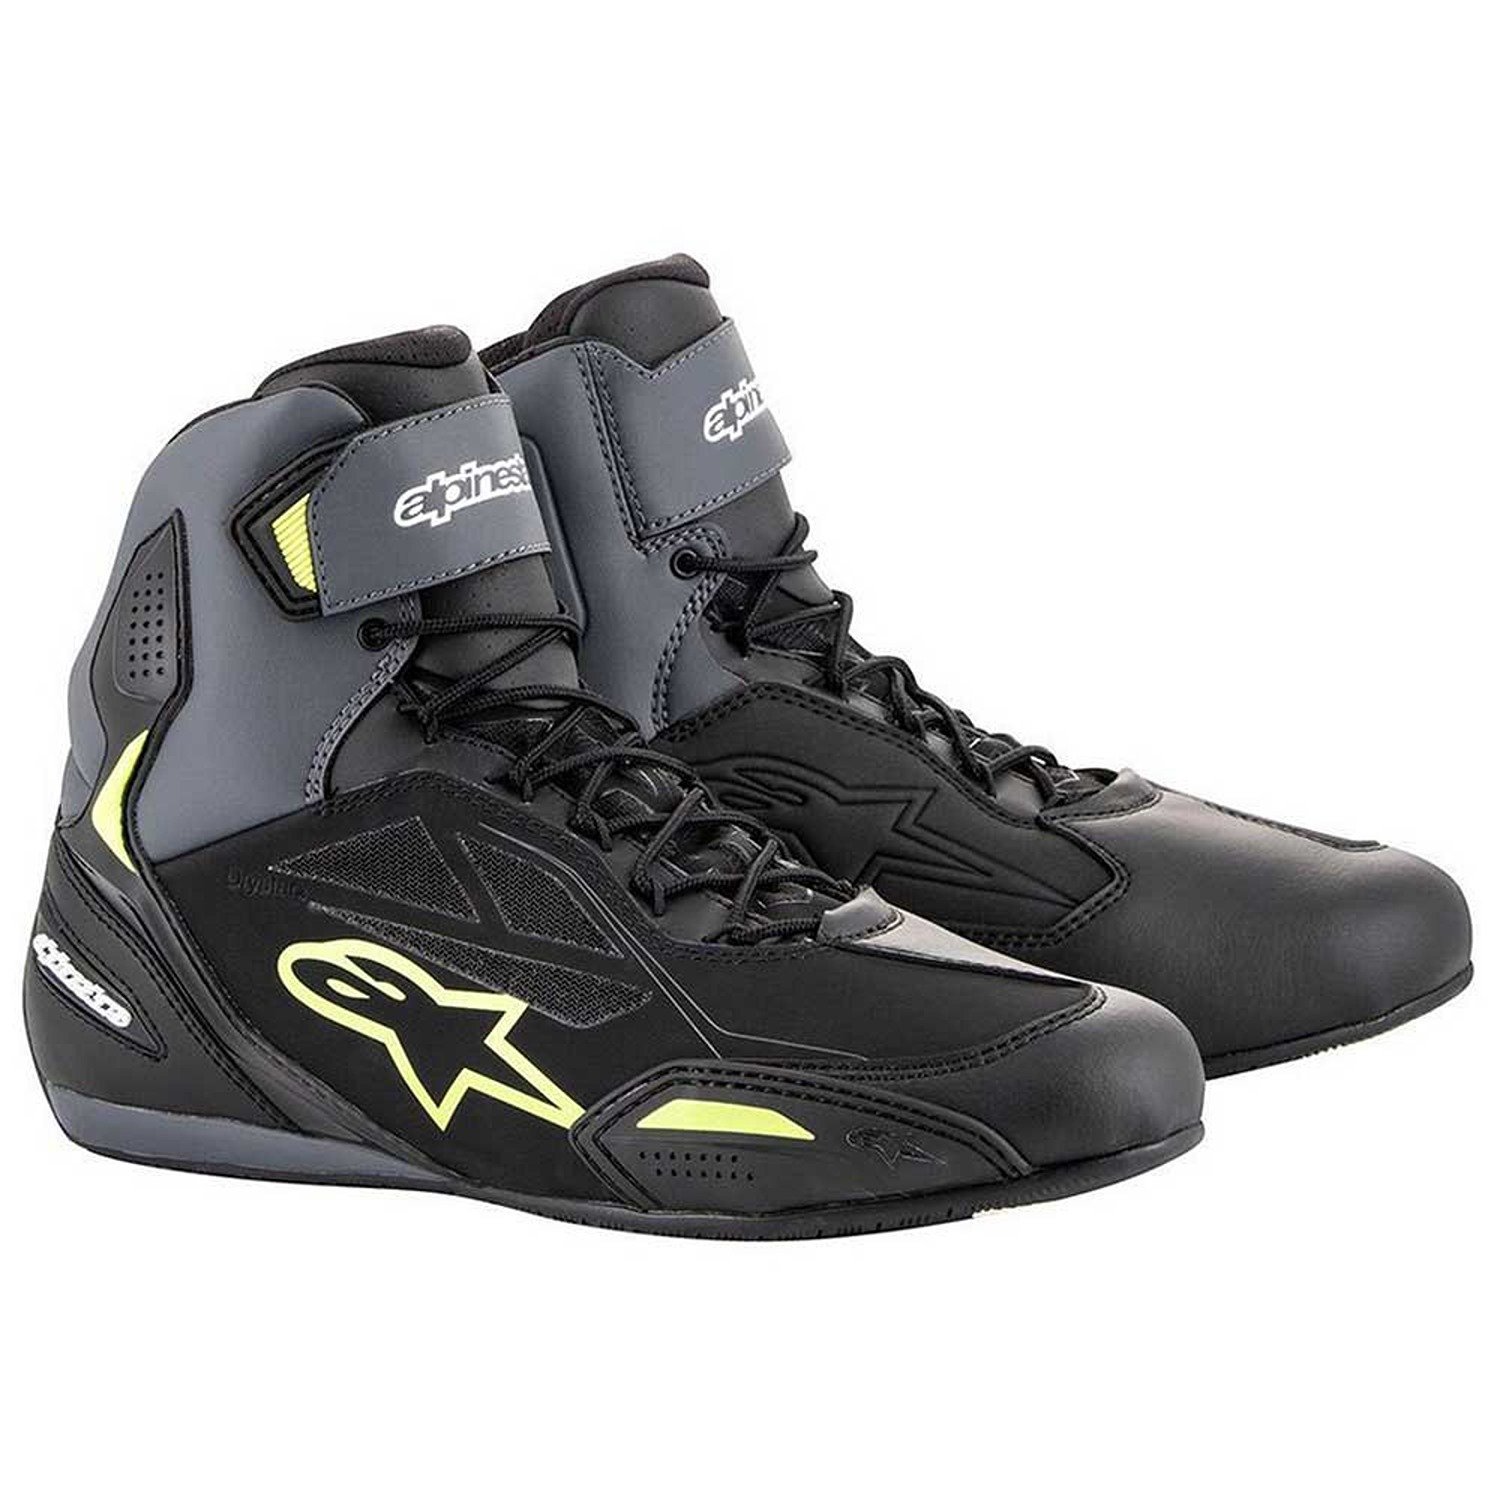 Image of Alpinestars Faster-3 Shoes Black Yellow Fluo Talla US 105